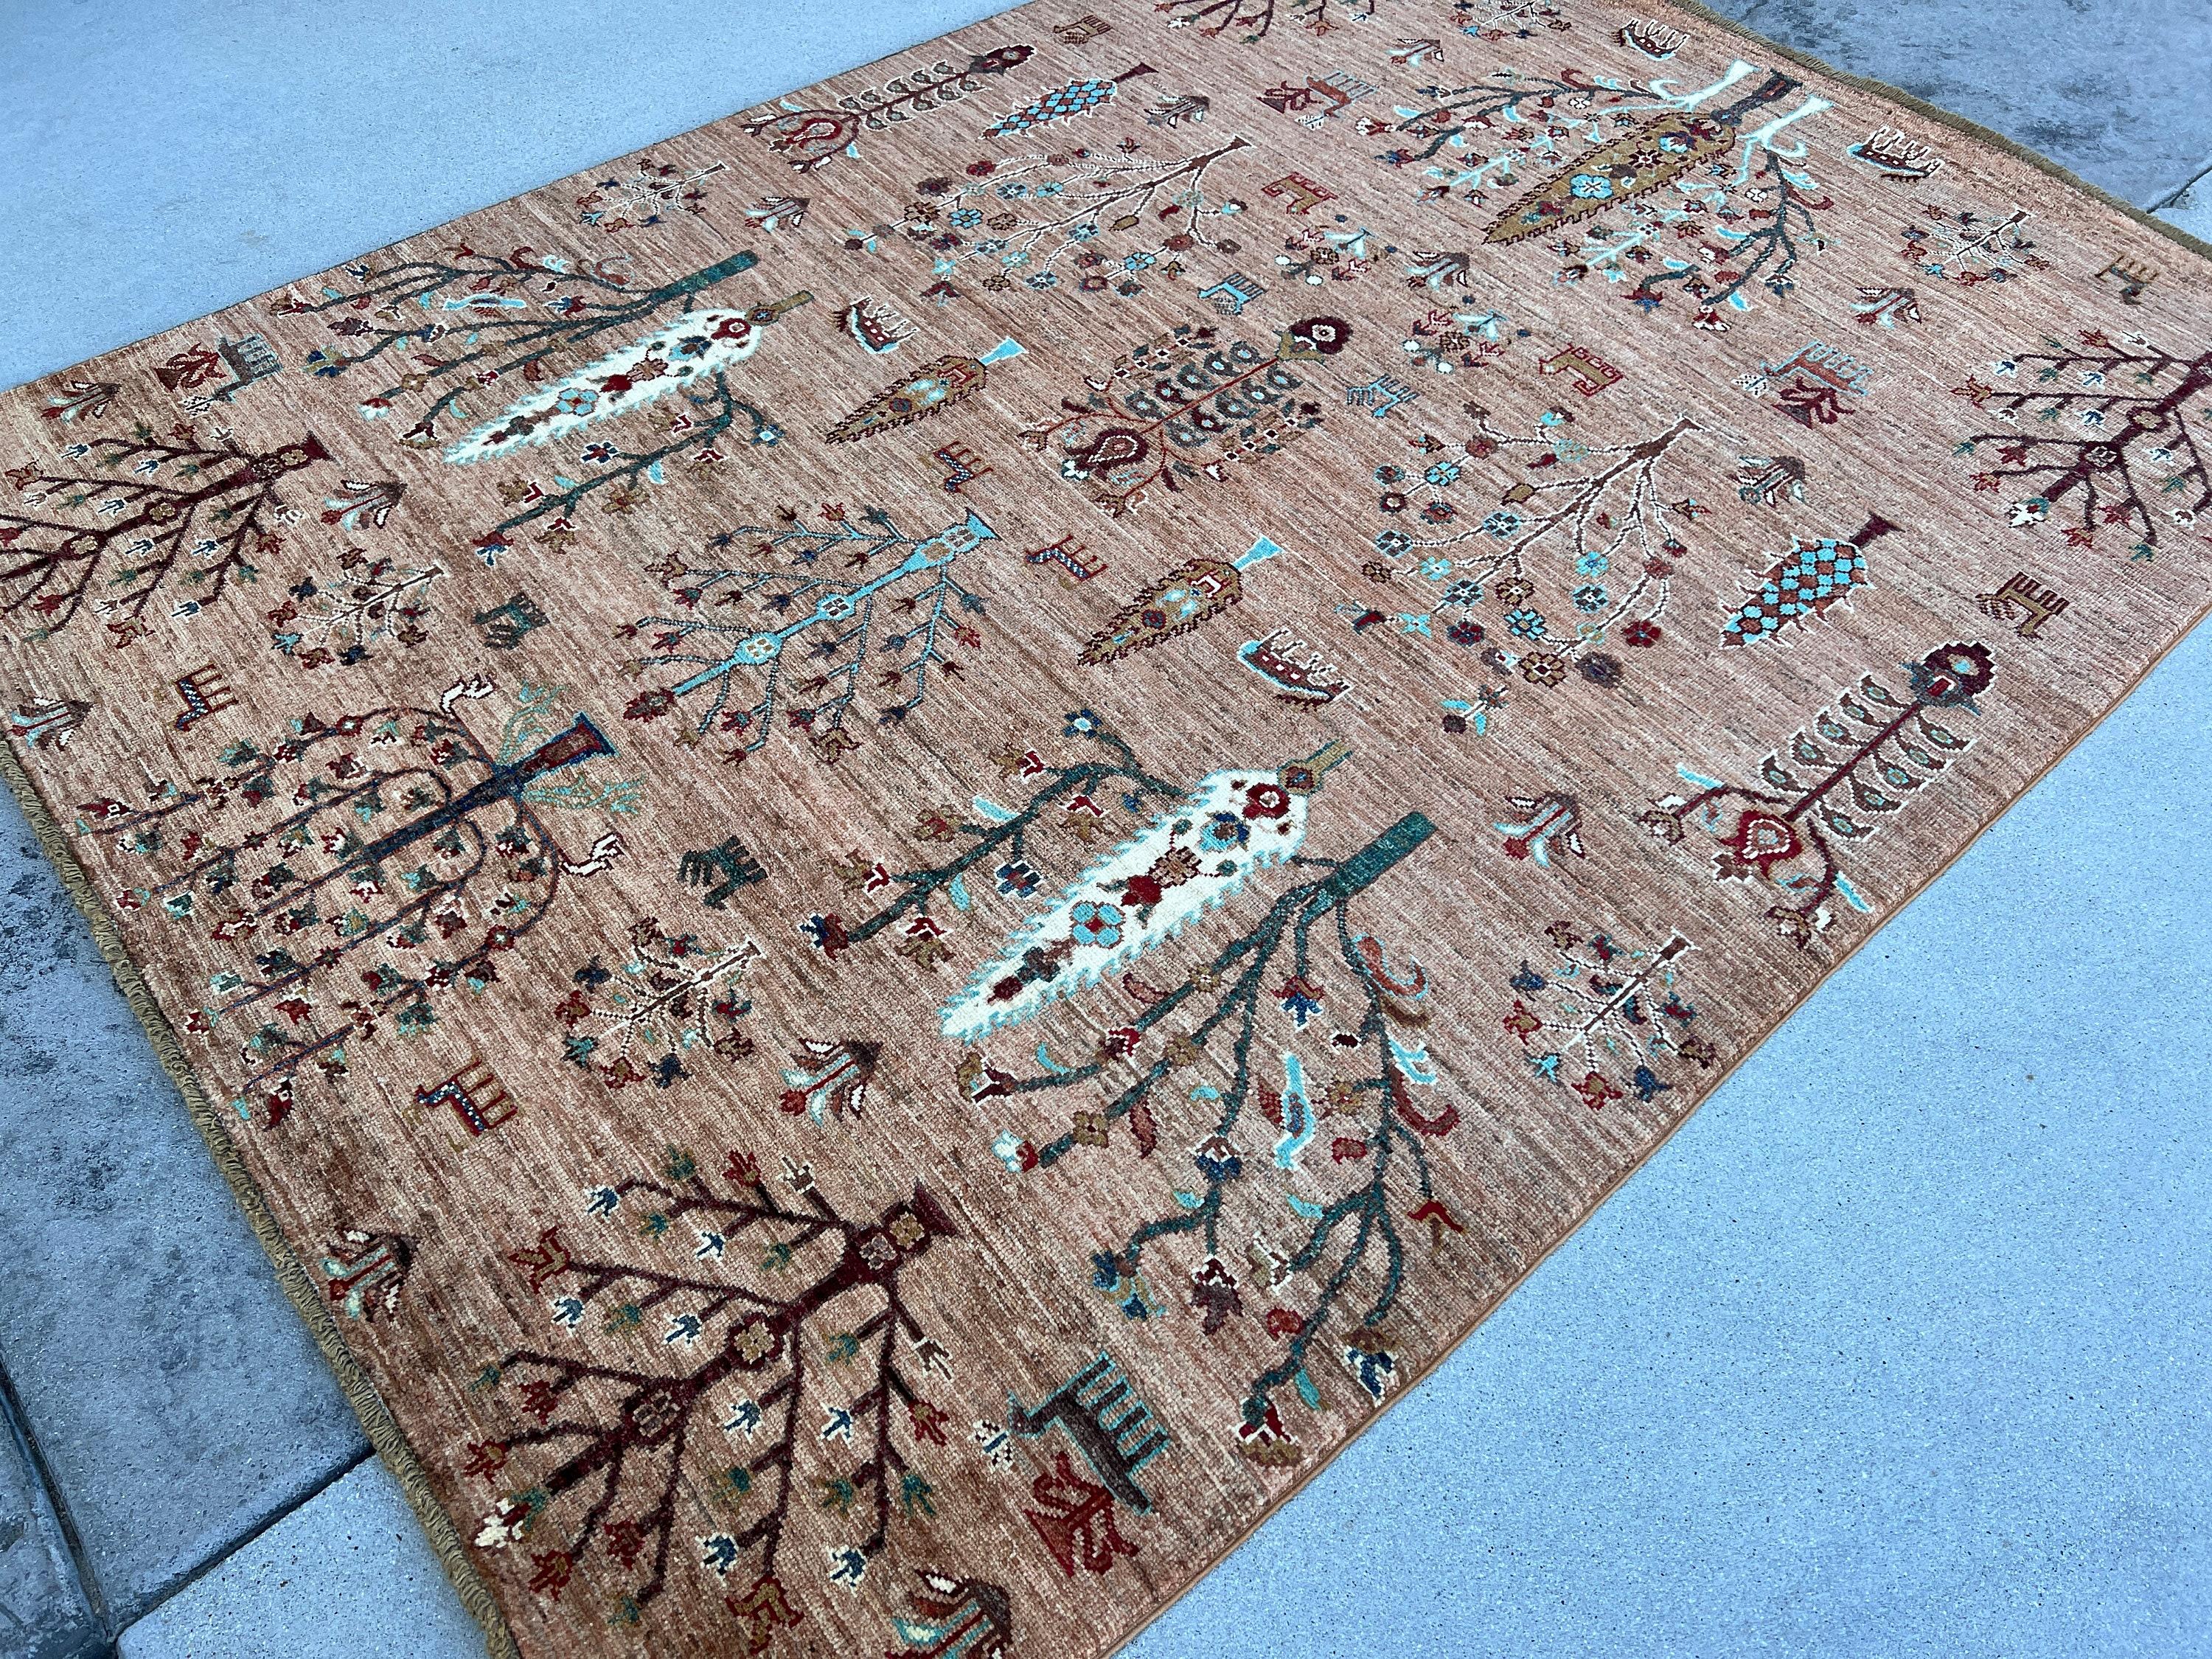 Contemporary Hand-Knotted Afghan Rug Premium Hand-Spun Afghan Wool Fair Trade